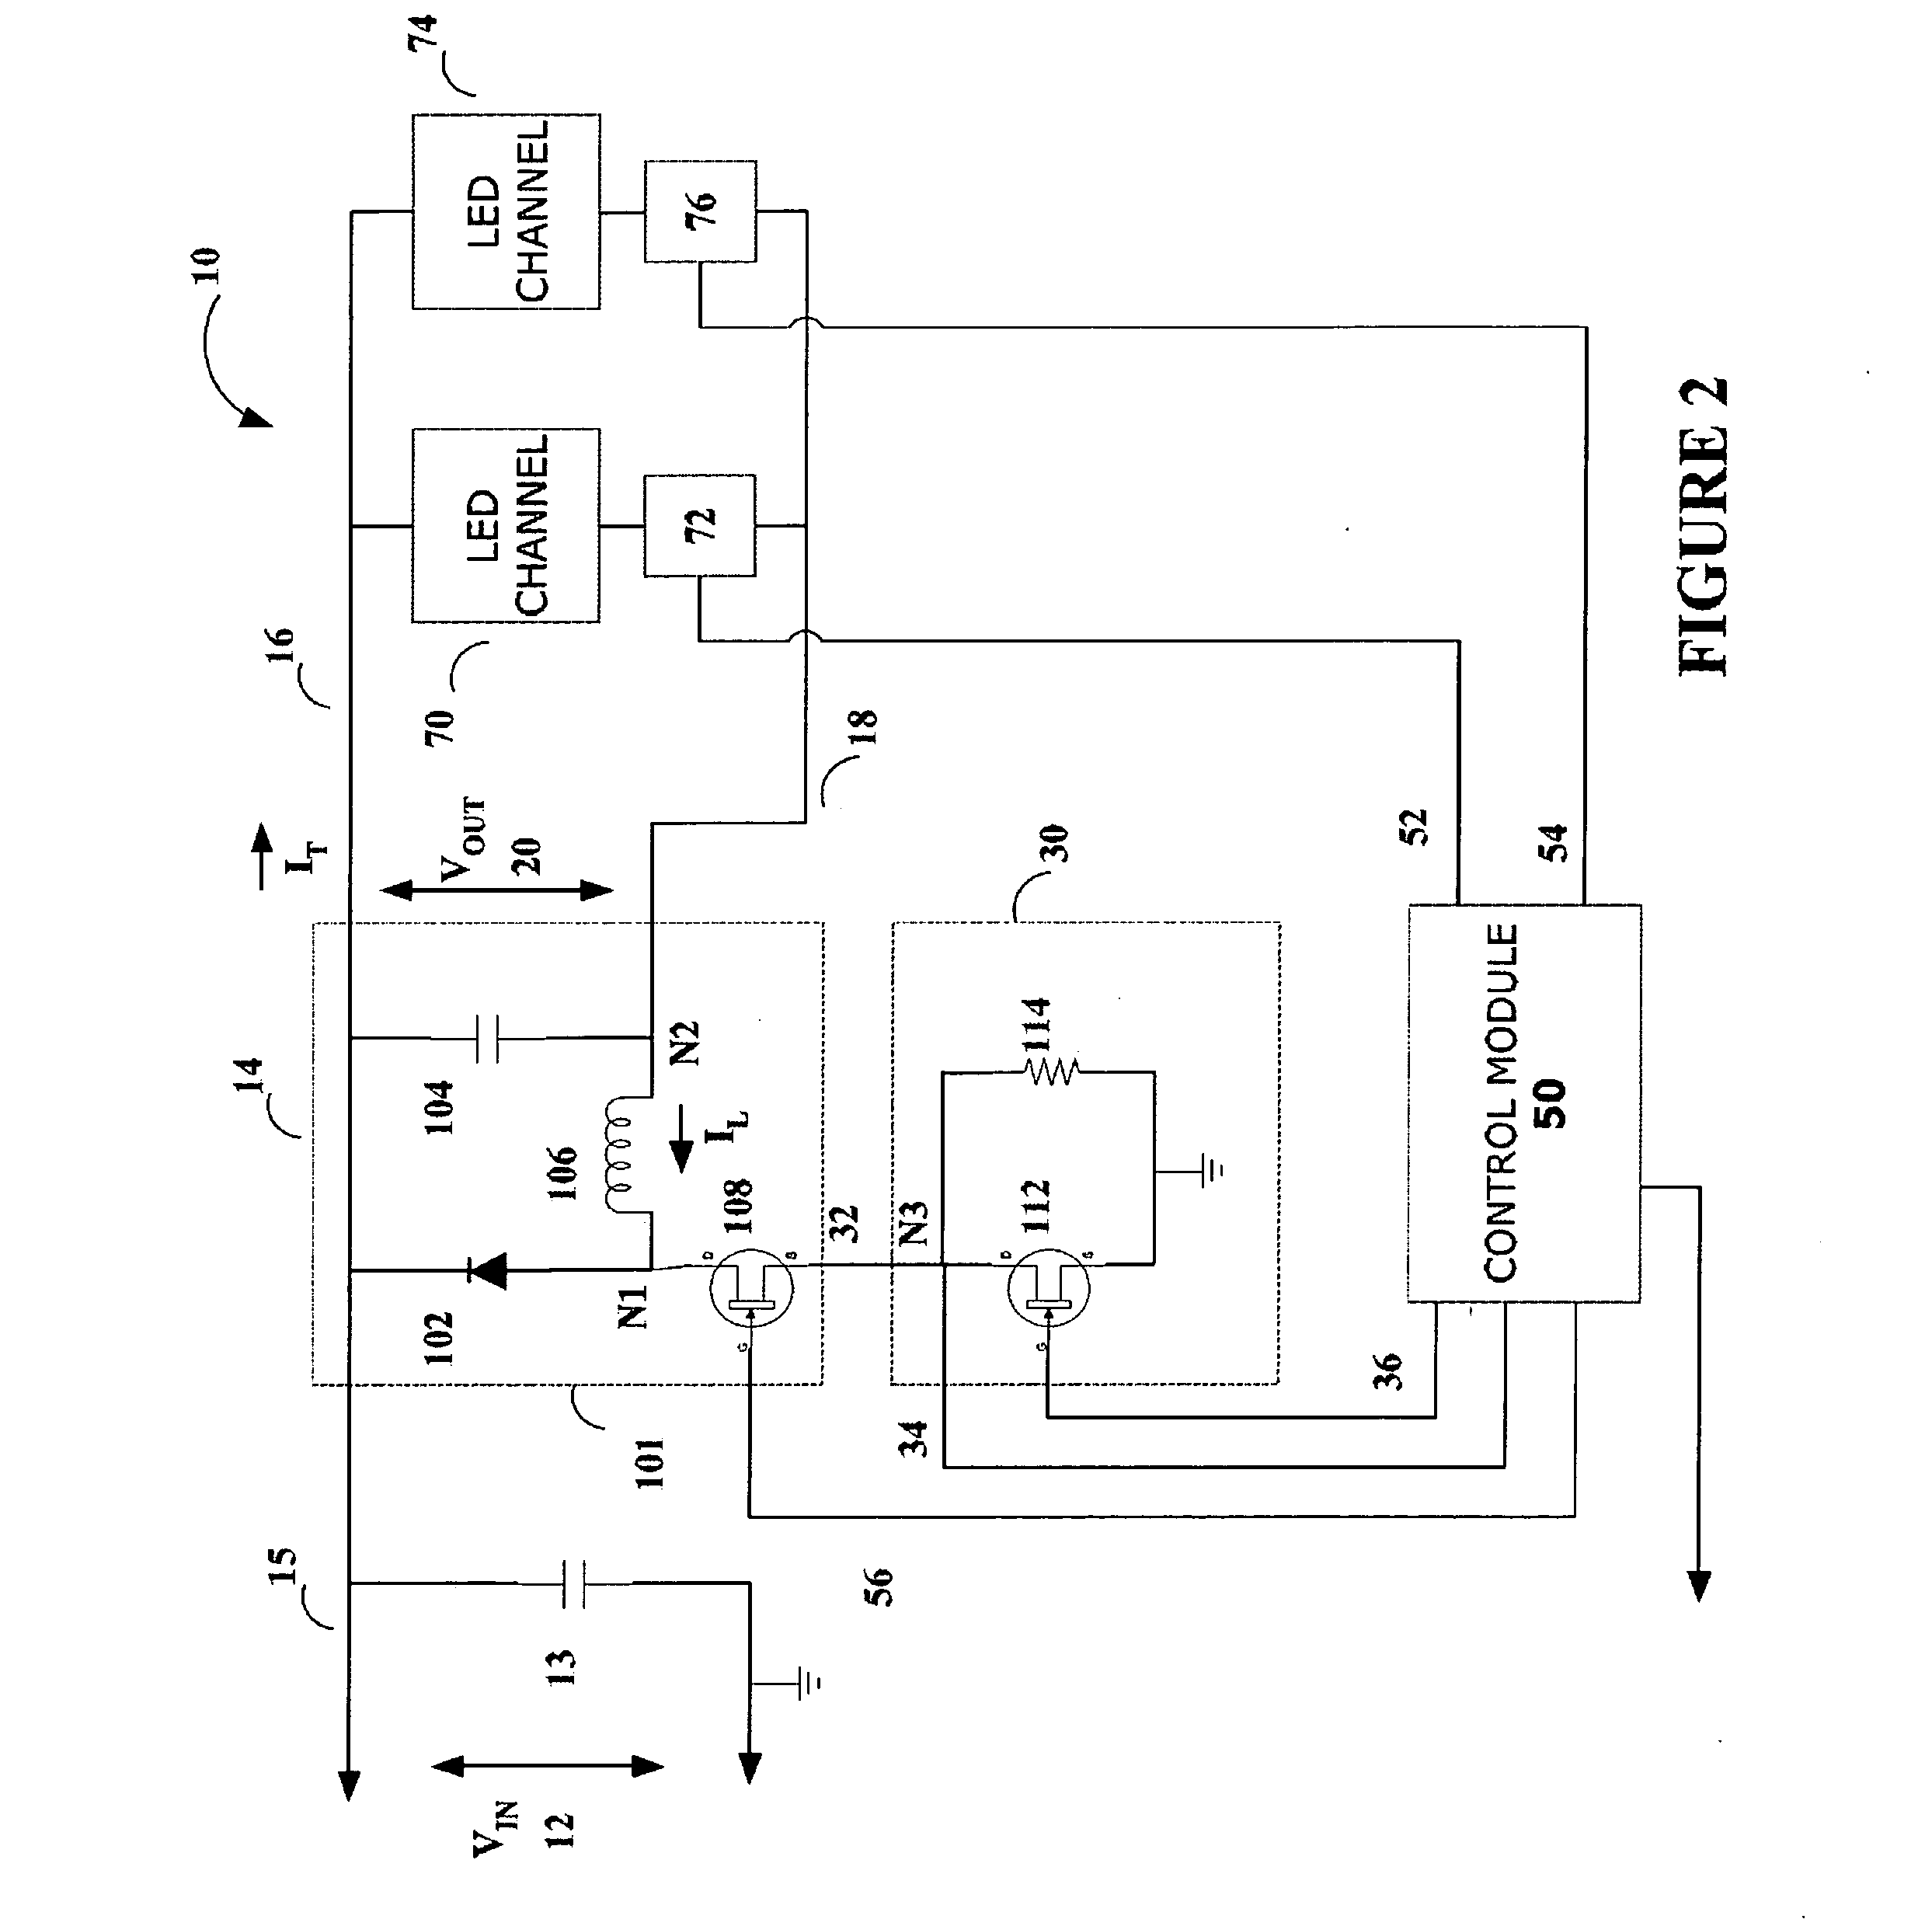 Control apparatus incorporating a voltage converter for controlling lighting apparatus